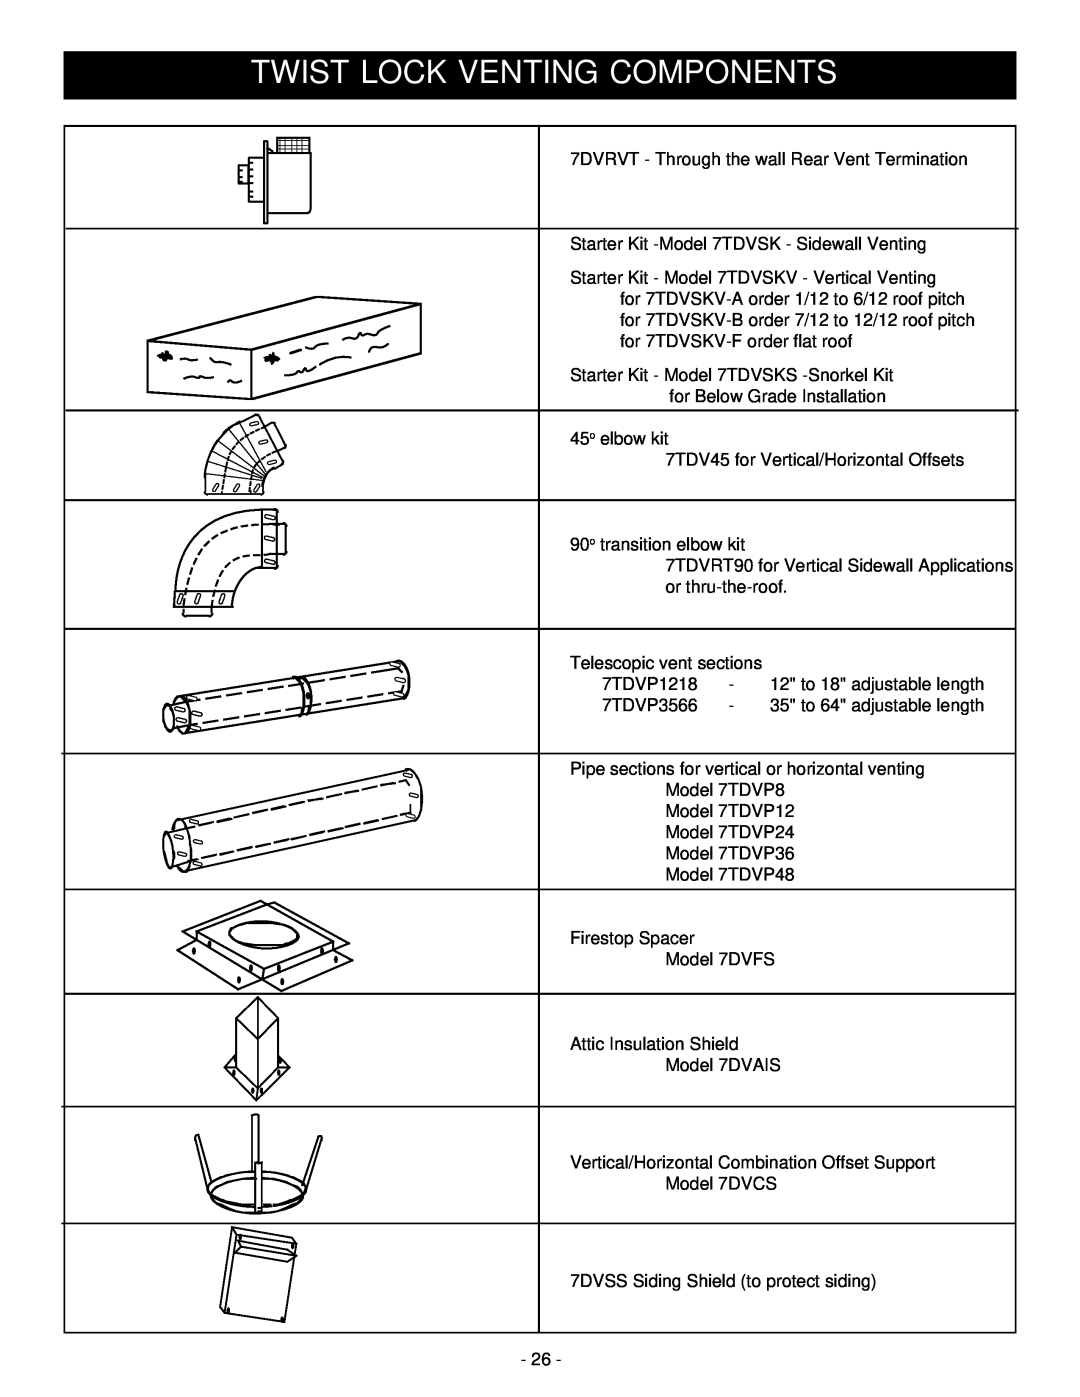 Vermont Casting BHDR36 installation instructions Twist Lock Venting Components 